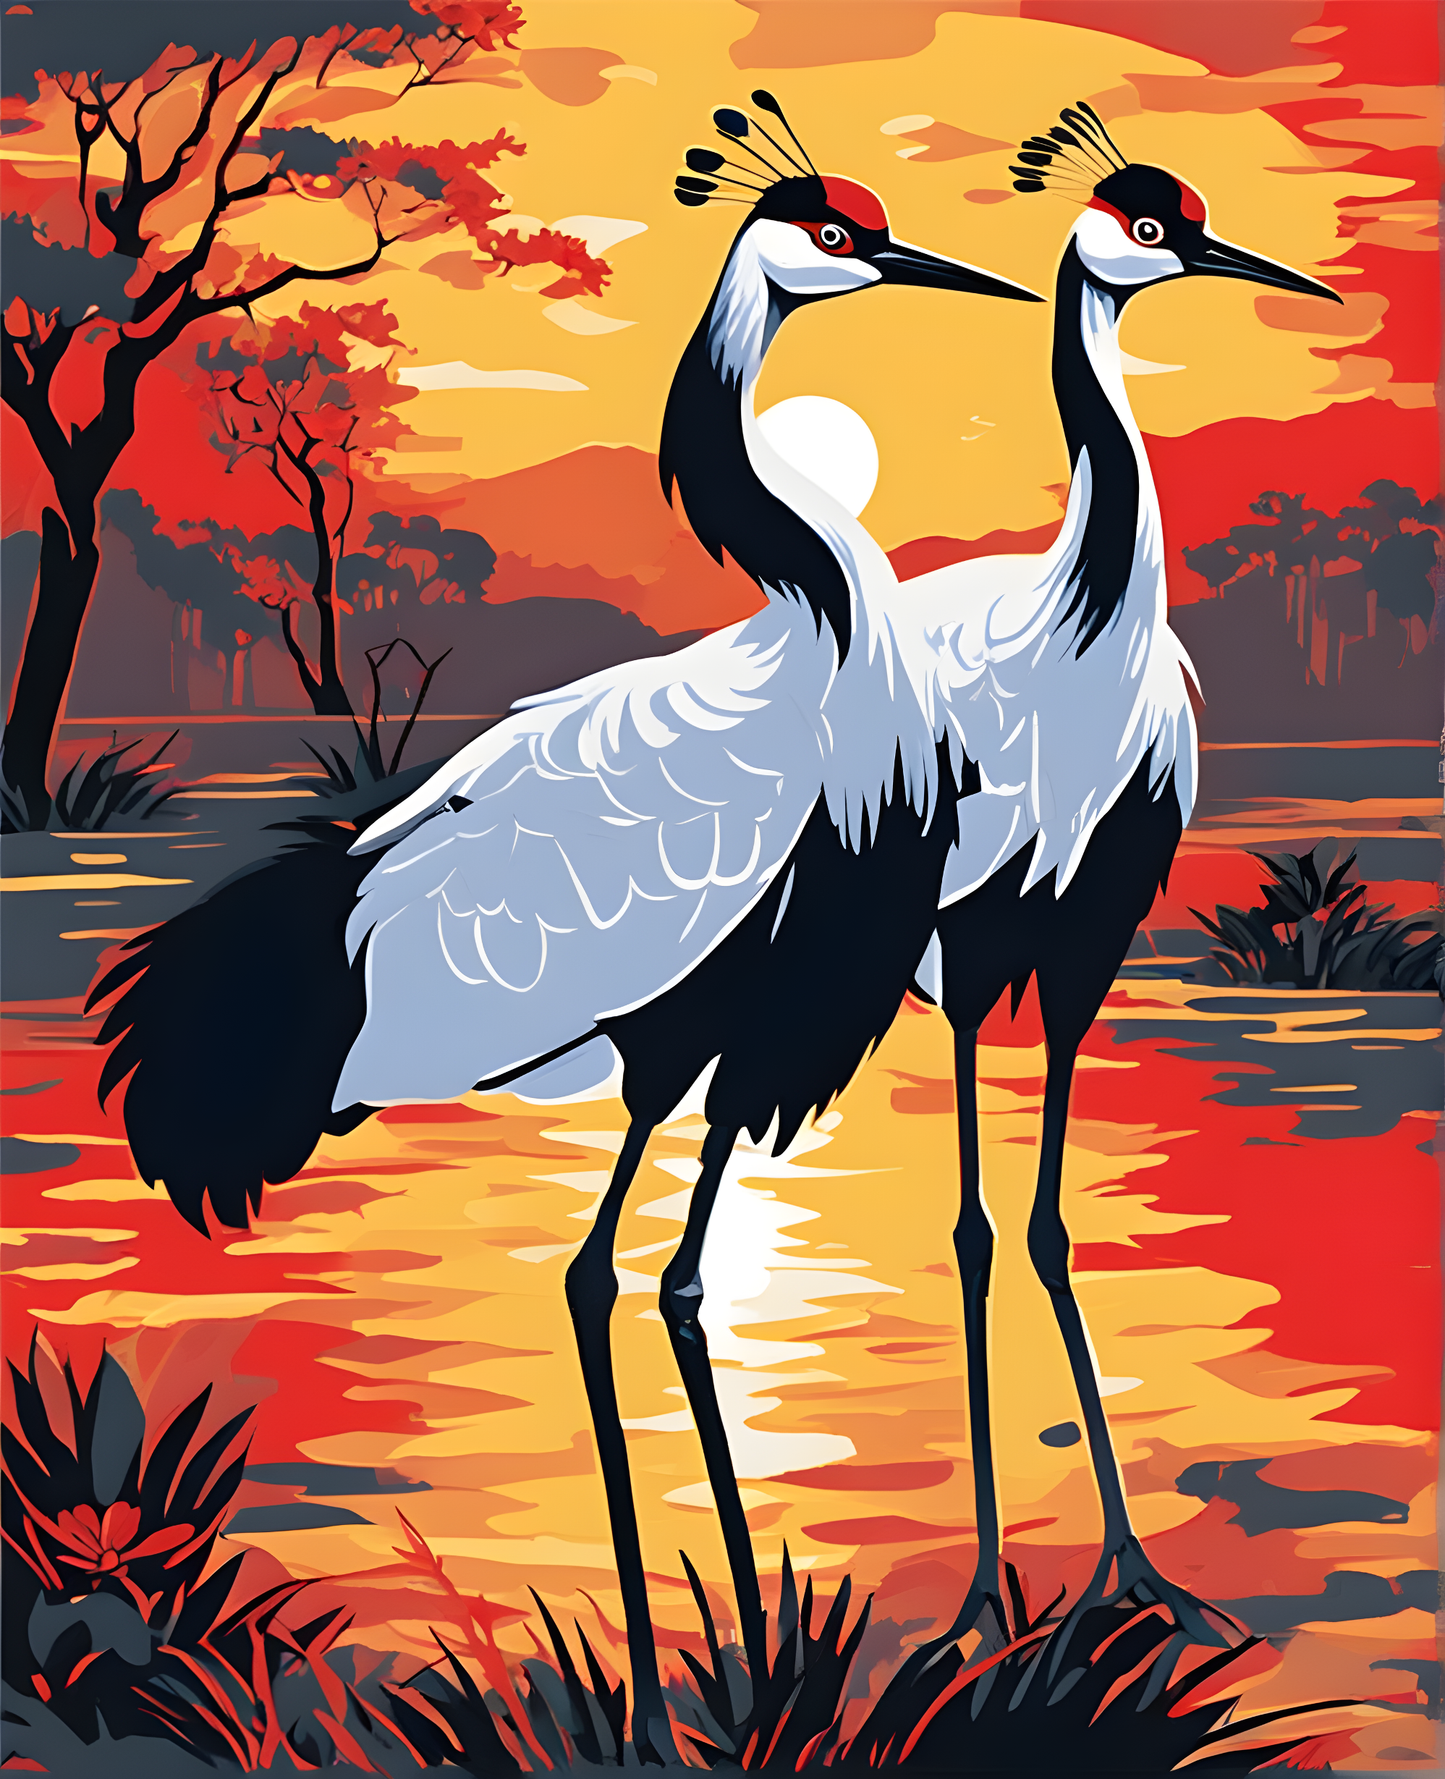 Red-Crowned Cranes at Sunrise (2) - Van-Go Paint-By-Number Kit